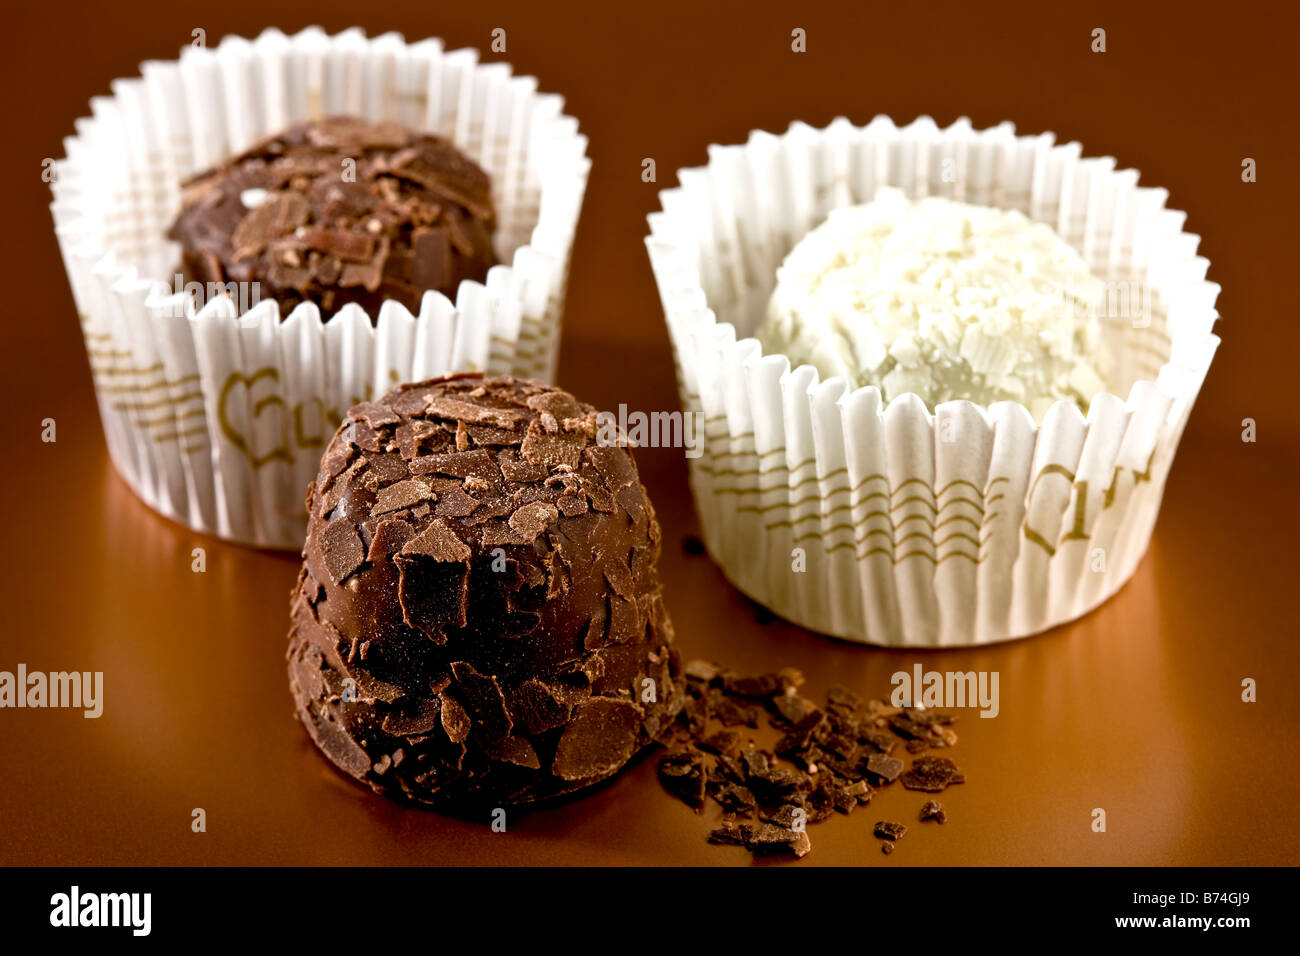 Chocolate with truffle filling Stock Photo